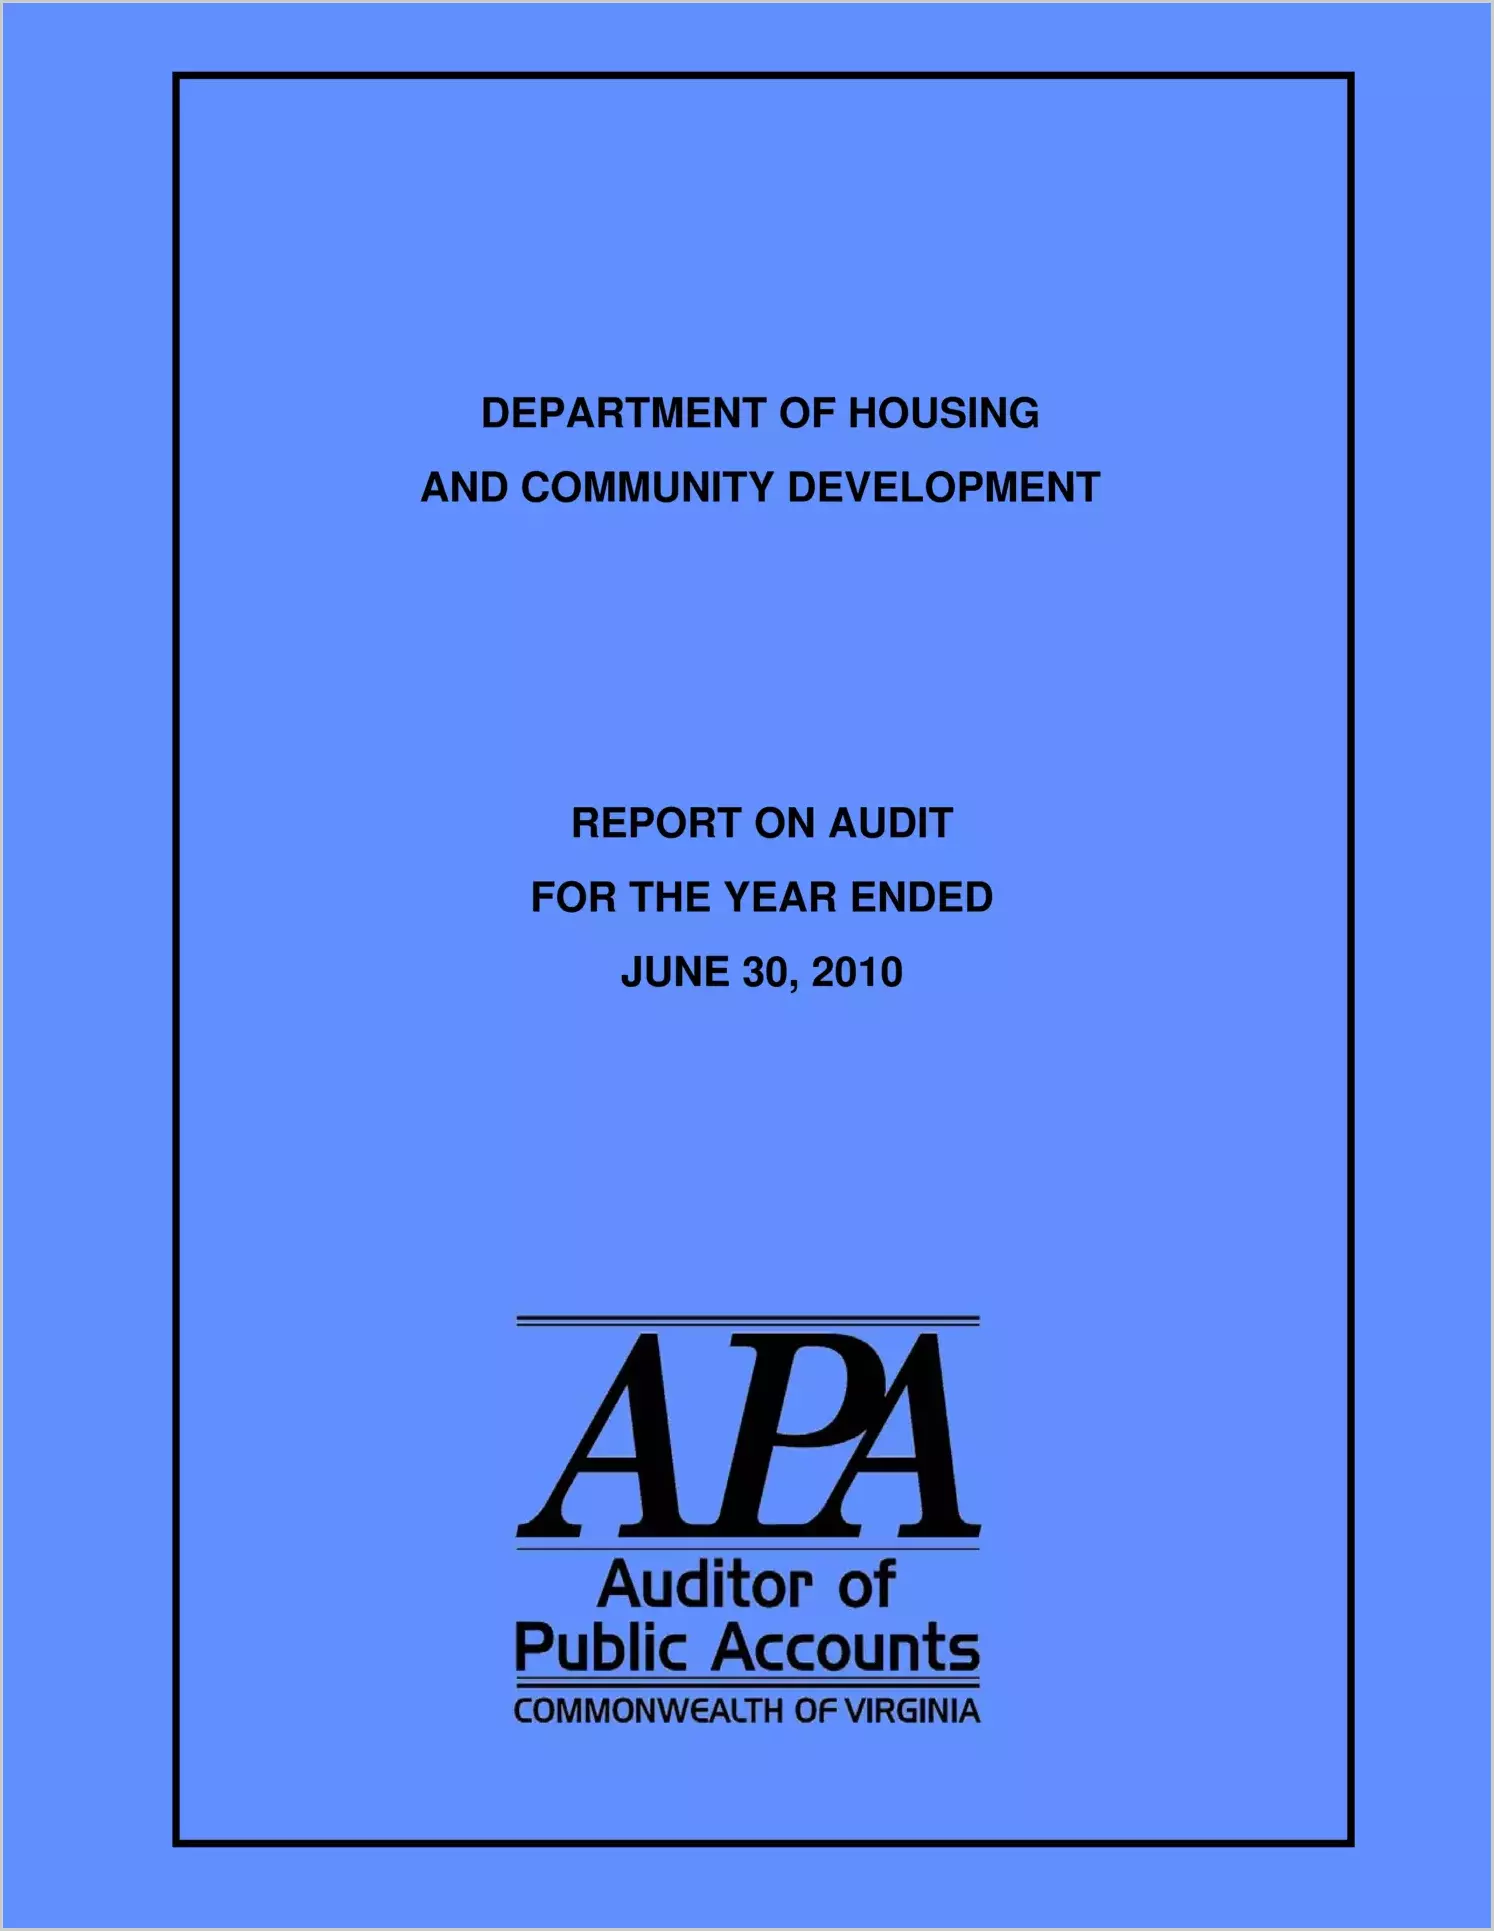 Department of Housing and Community Development report on audit for the year ended June 30, 2010